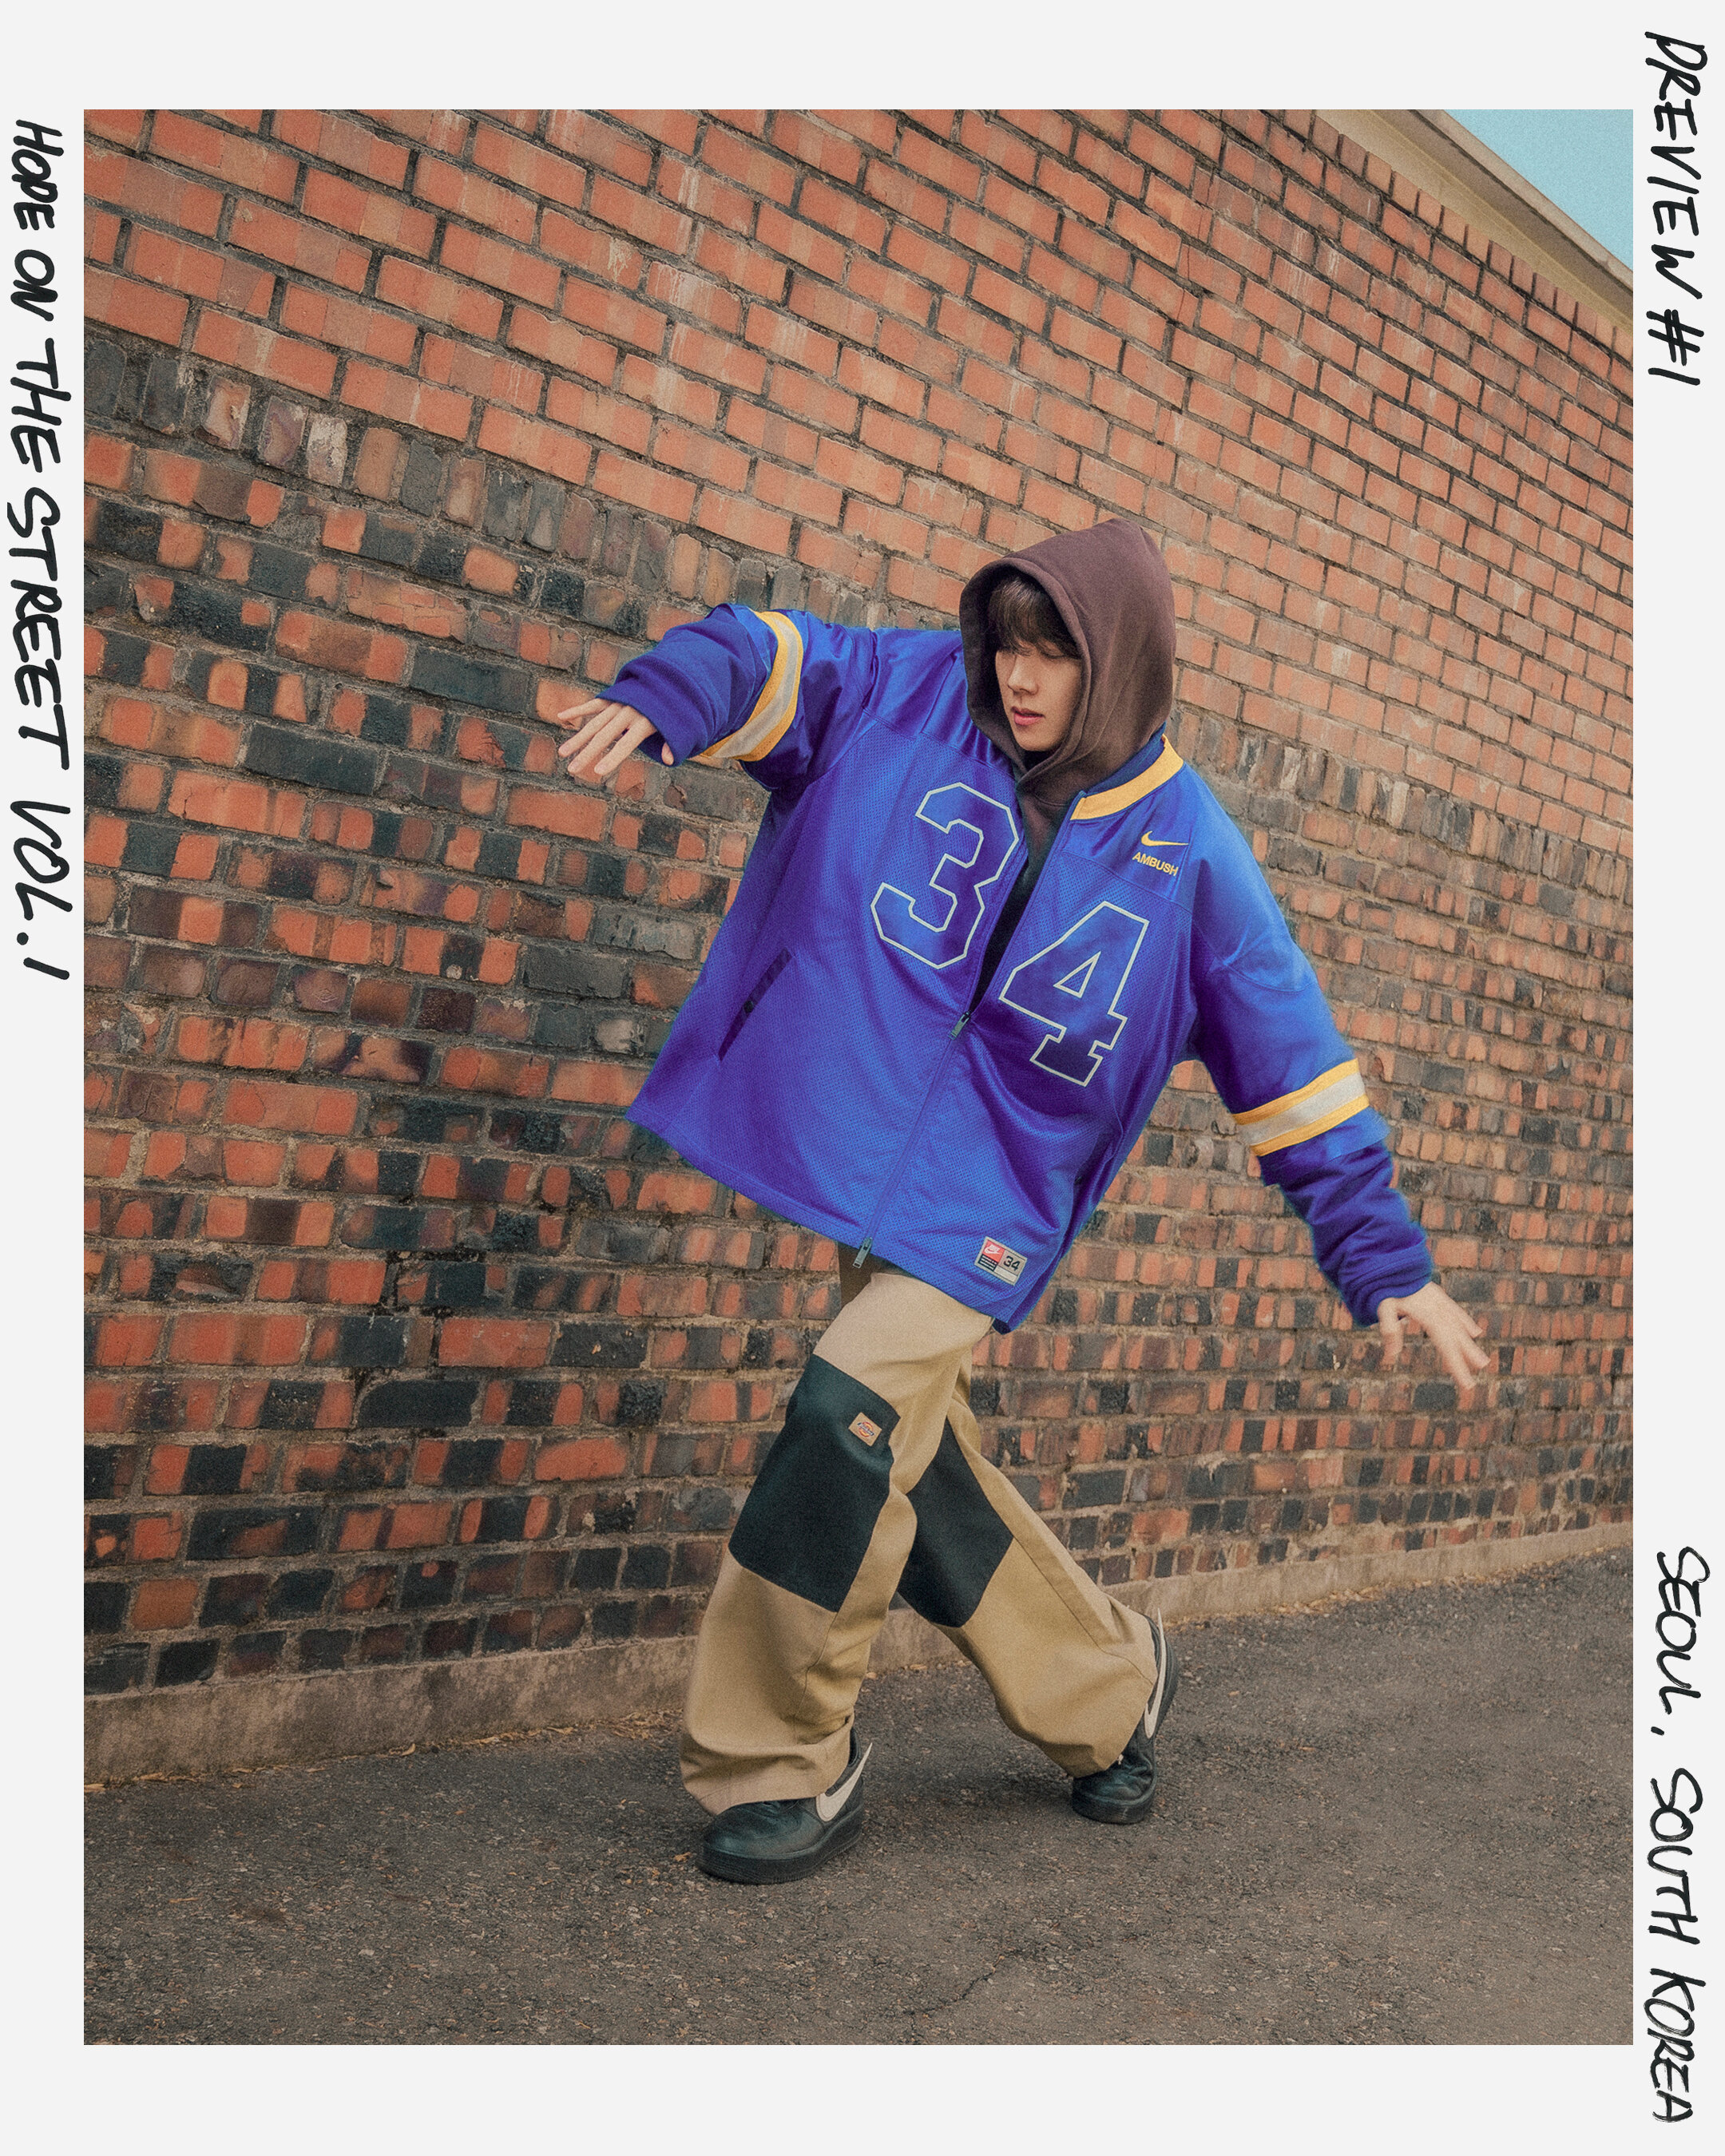 j-hope - 'HOPE ON THE STREET VOL.1' Preview Cuts | kpopping